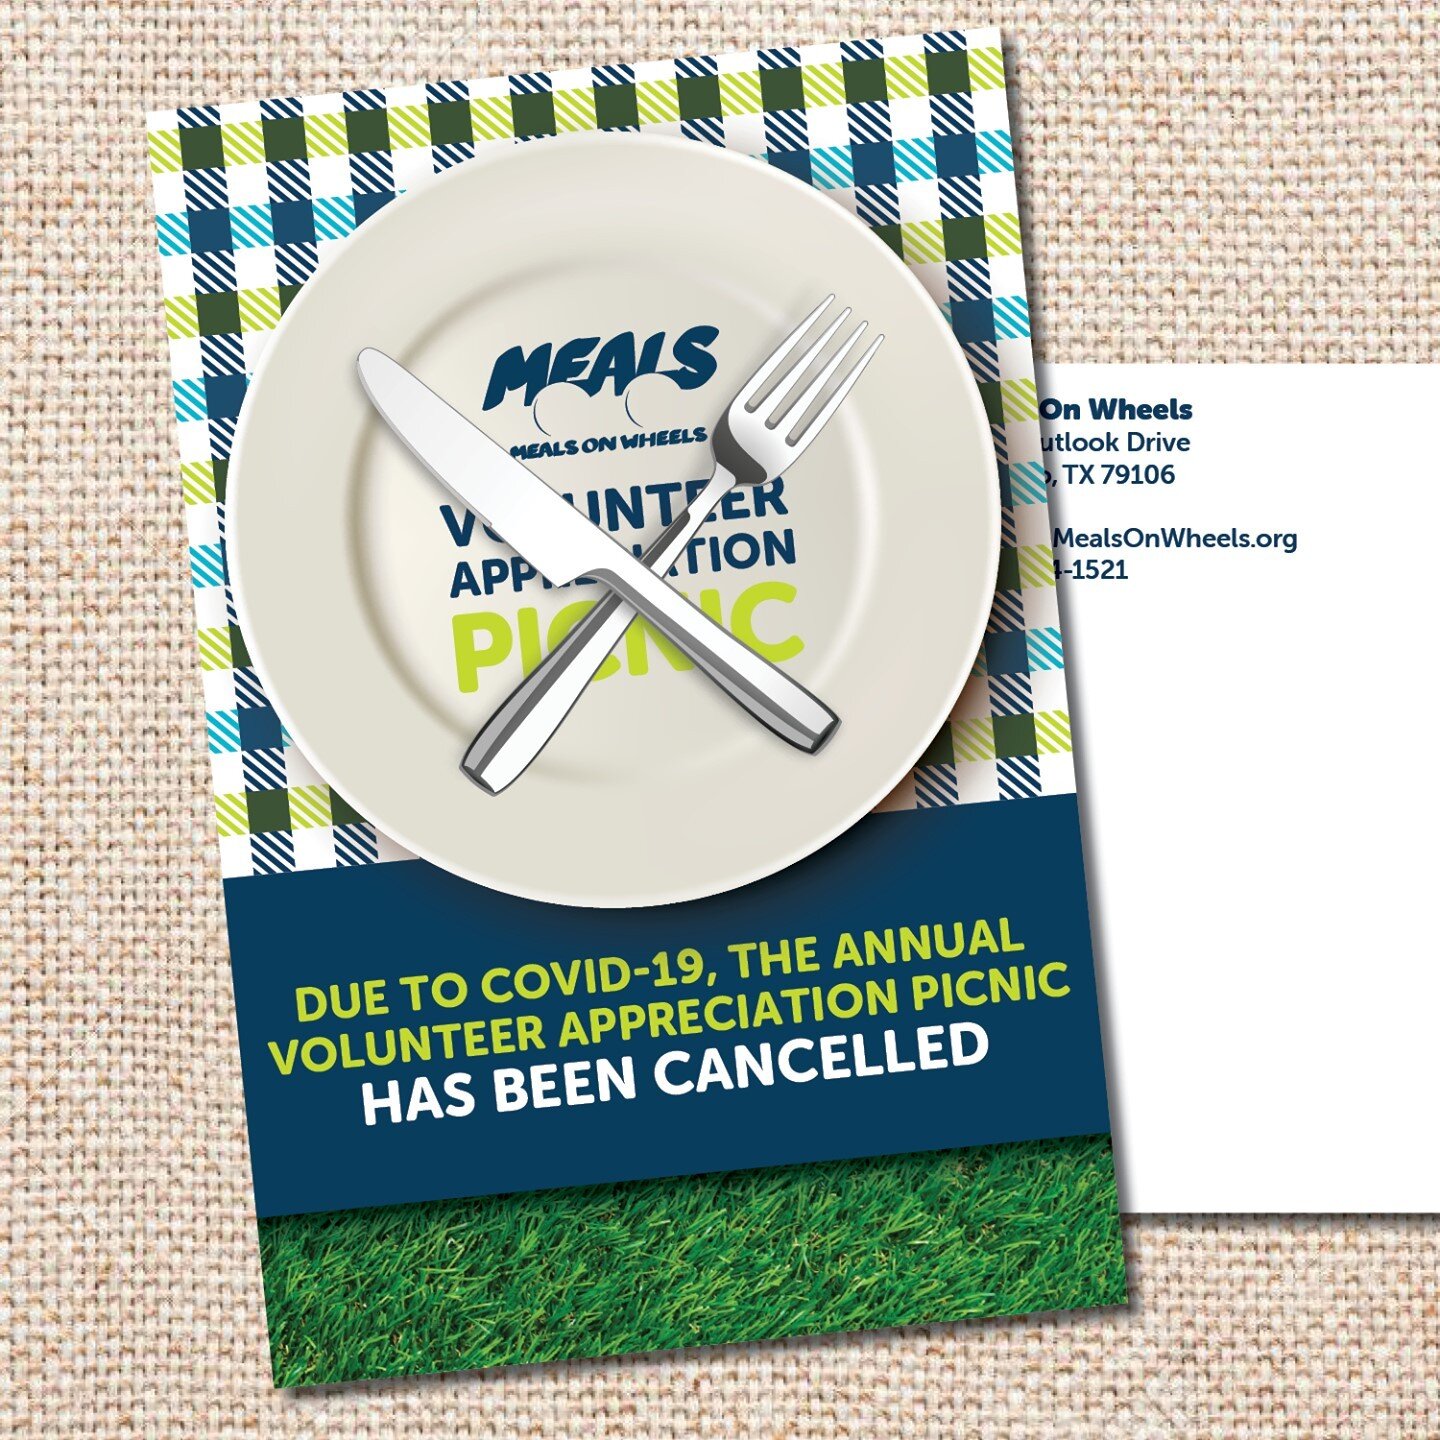 We know a lot of events have been cancelled this year. Let one of our designers help you with your cancellation postcard. #pps #design #directmail